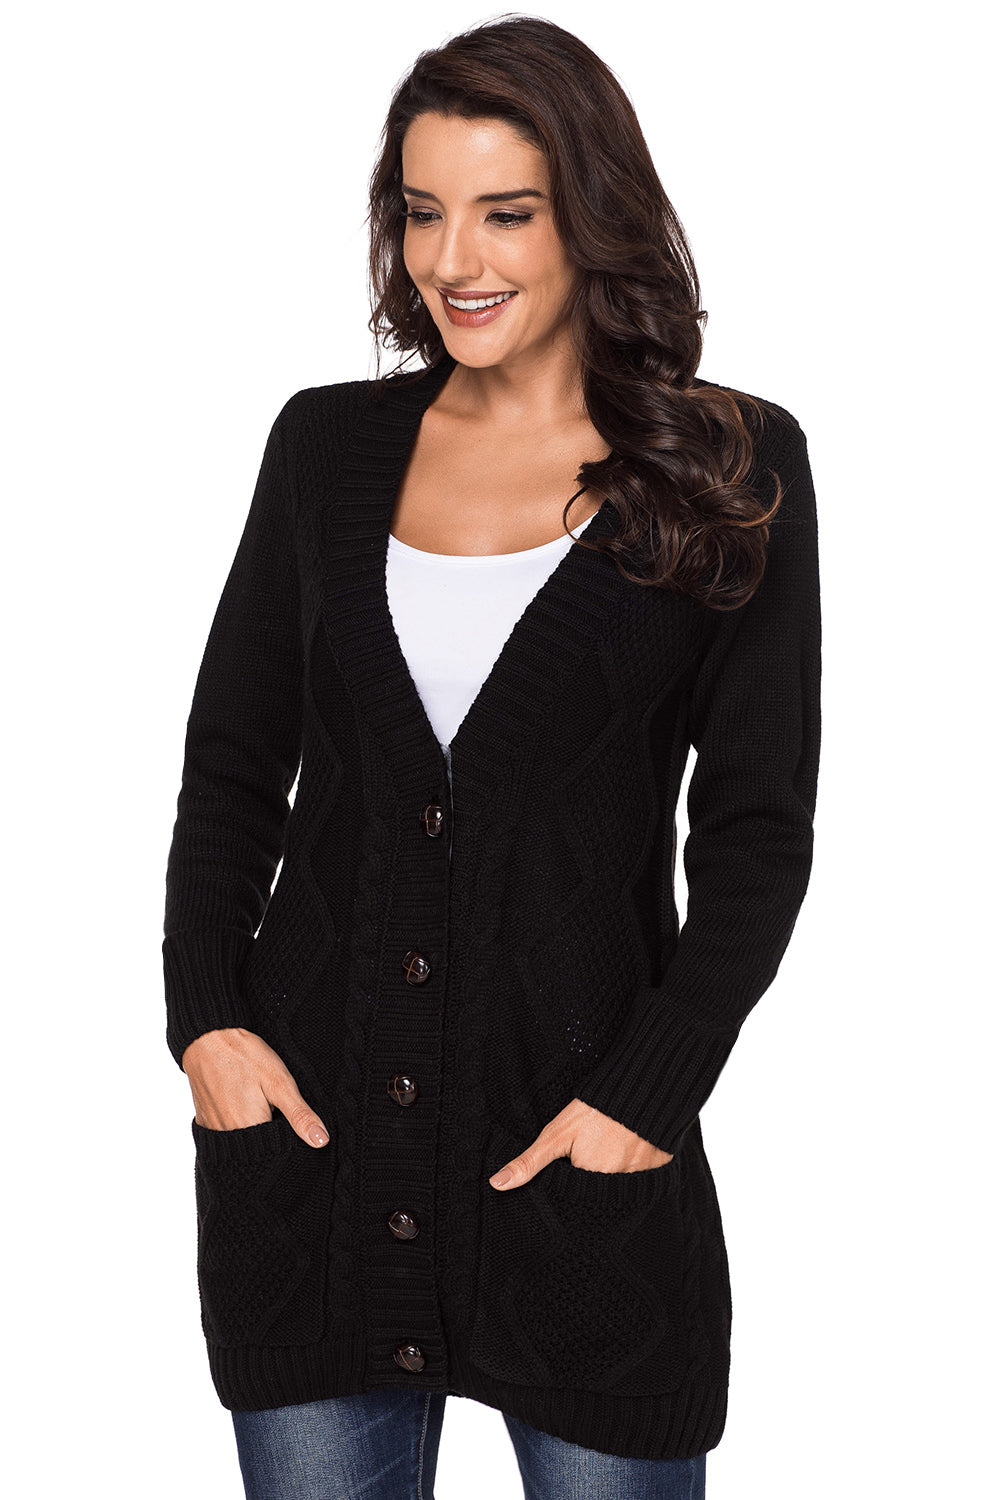 Fashion Black Front Pocket and Buttons Closure Cardigan